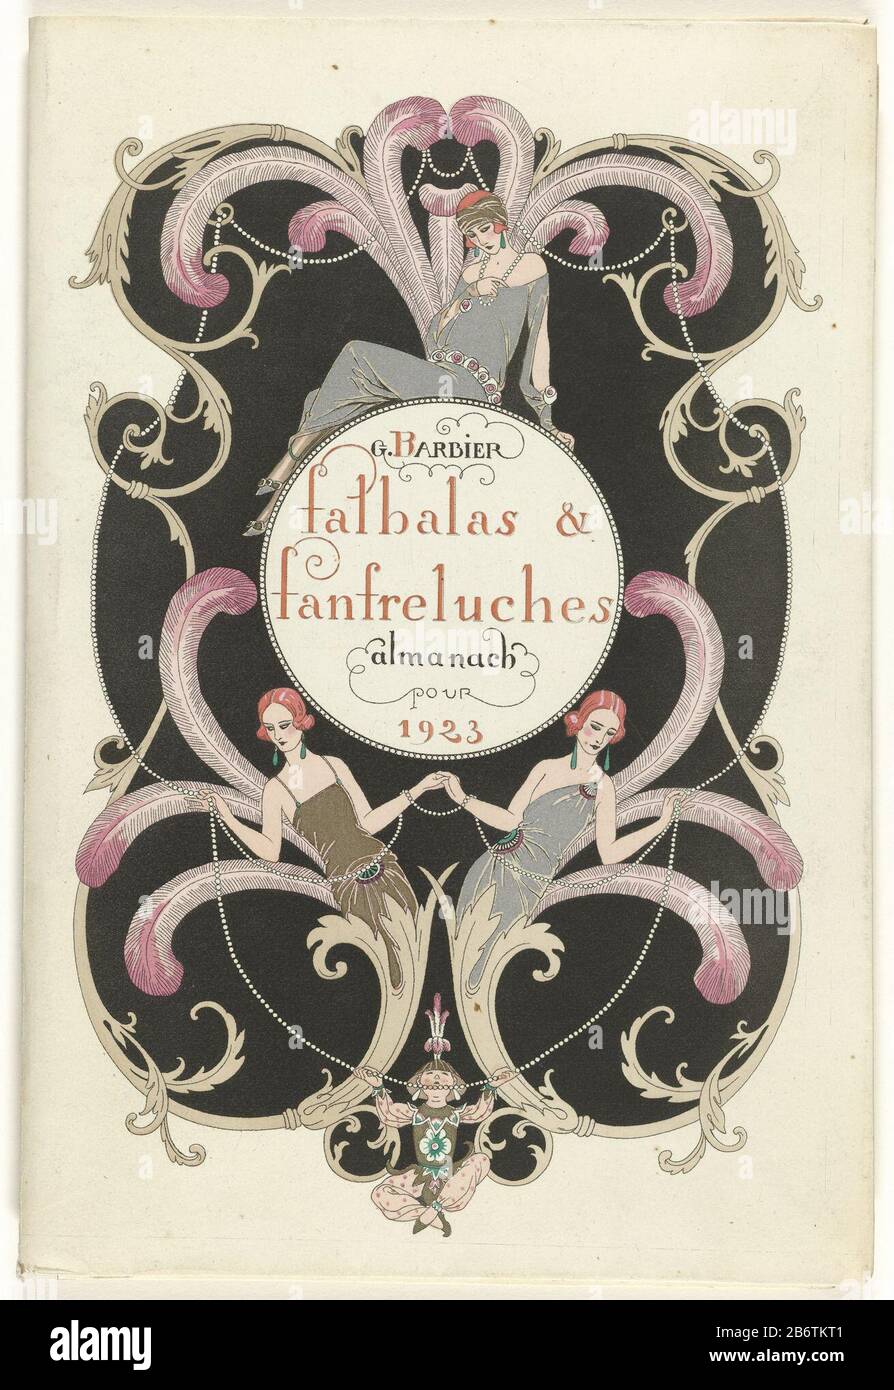 Cover, cover page, title page read: Falbalas et fanfreluches / 1923 / Colette / Modes / aquarelles par G. Barber. Five pages of text by Colette. Calendar of 1923. Second title page Where: full title and illustration. Contents of the titles of the twelve prints George Barbier. Manufacturer : to drawing: George Barbier (listed building) printmaker: anonymous publisher J. Meynial (listed property) Place manufacture: Paris Date: 1923 Physical features: lithography, templates and hand-colored, brush in silver and gold material: paper Technique: letterpress printing / pochoir / brush / brush / hand- Stock Photo